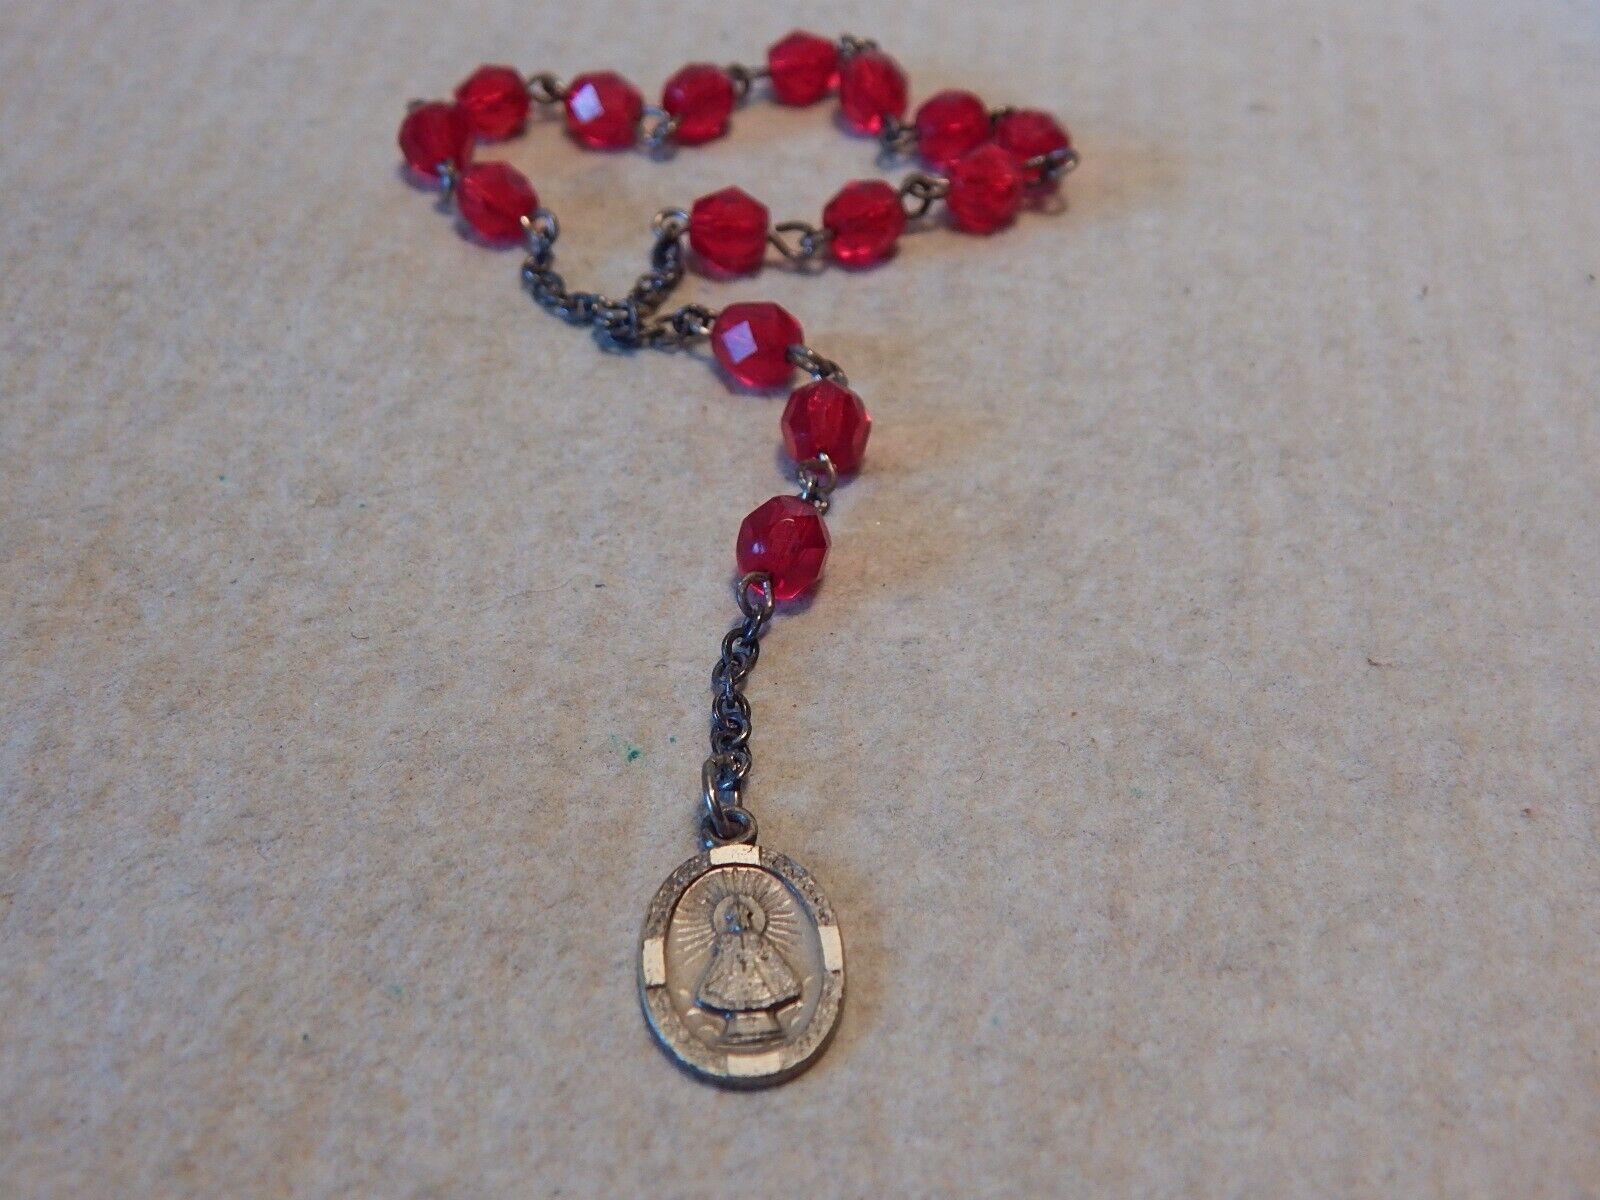 VTG 1950S 60S SMALL CATHOLIC QUICKIE ROSARY STERLING SILVER CHRIST CHILD